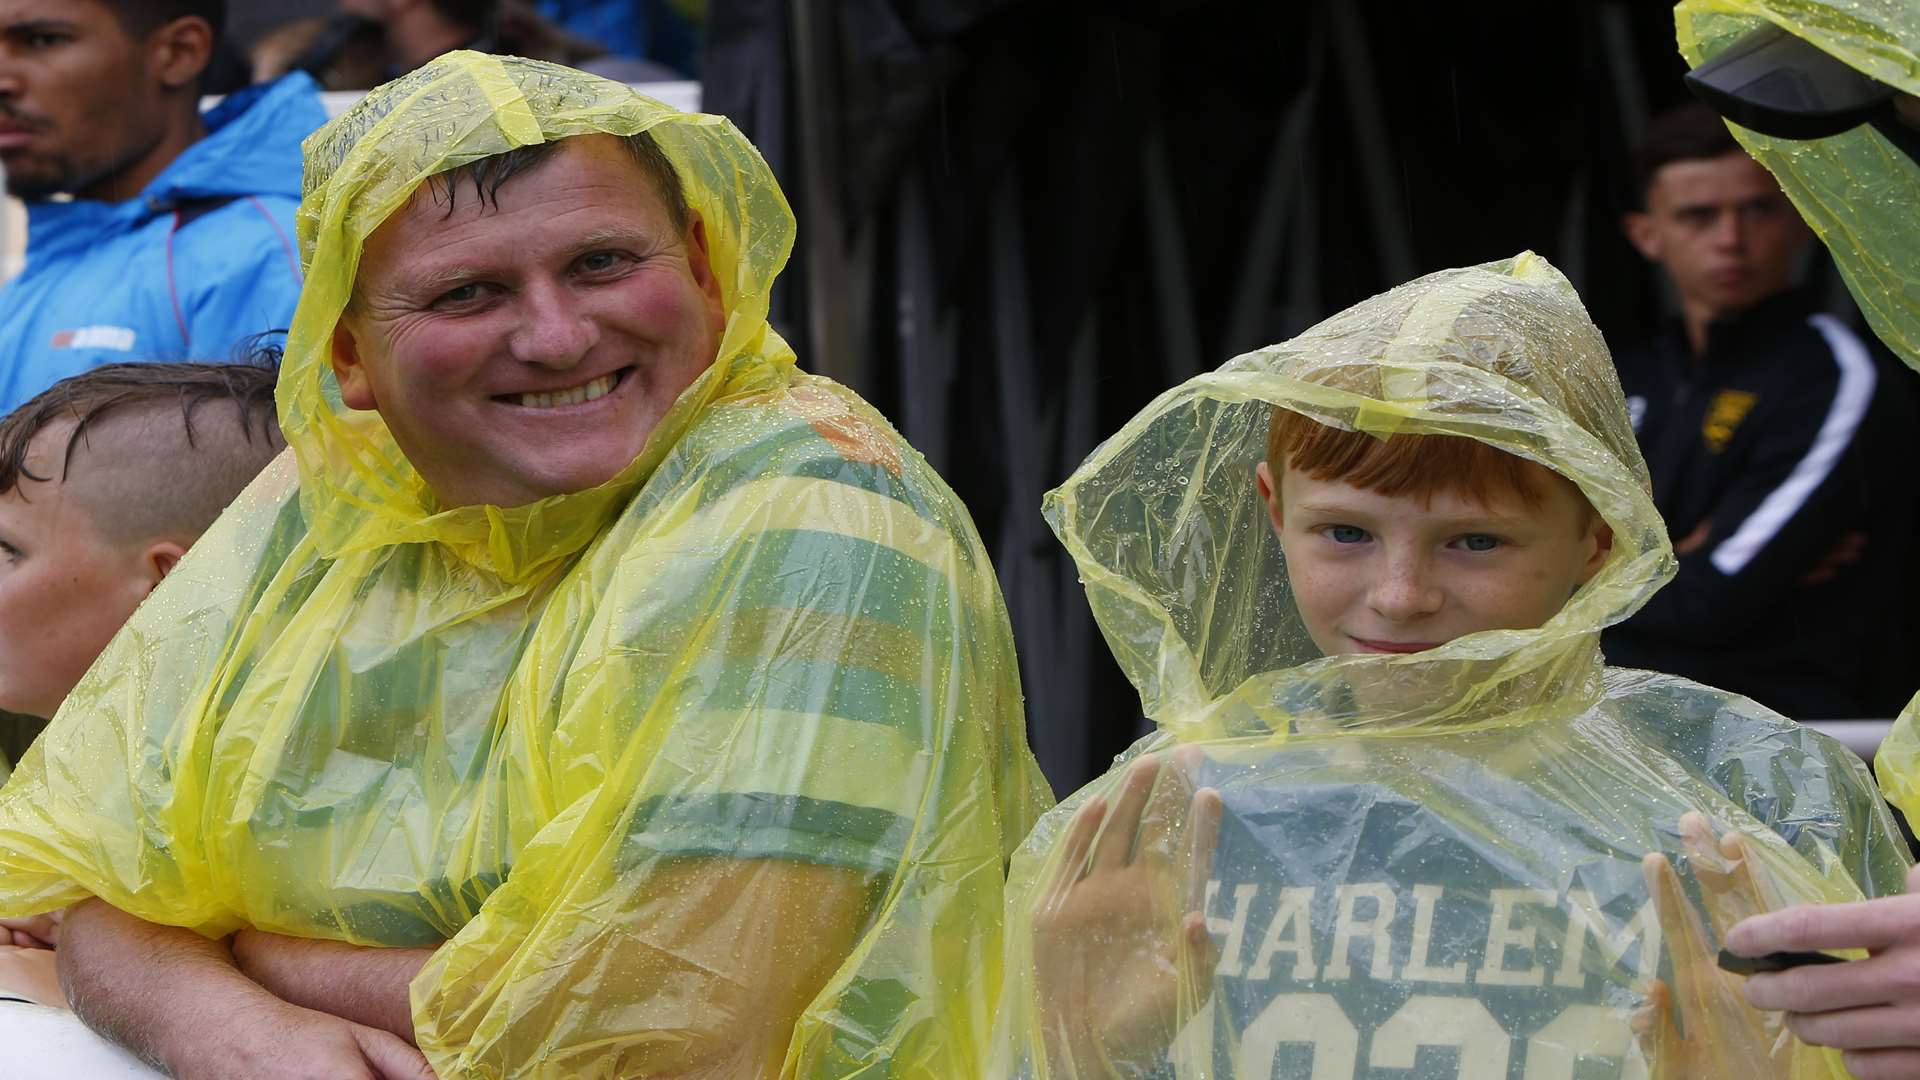 The rain was not going to spoil the opening day for these fans Picture: Andy Jones